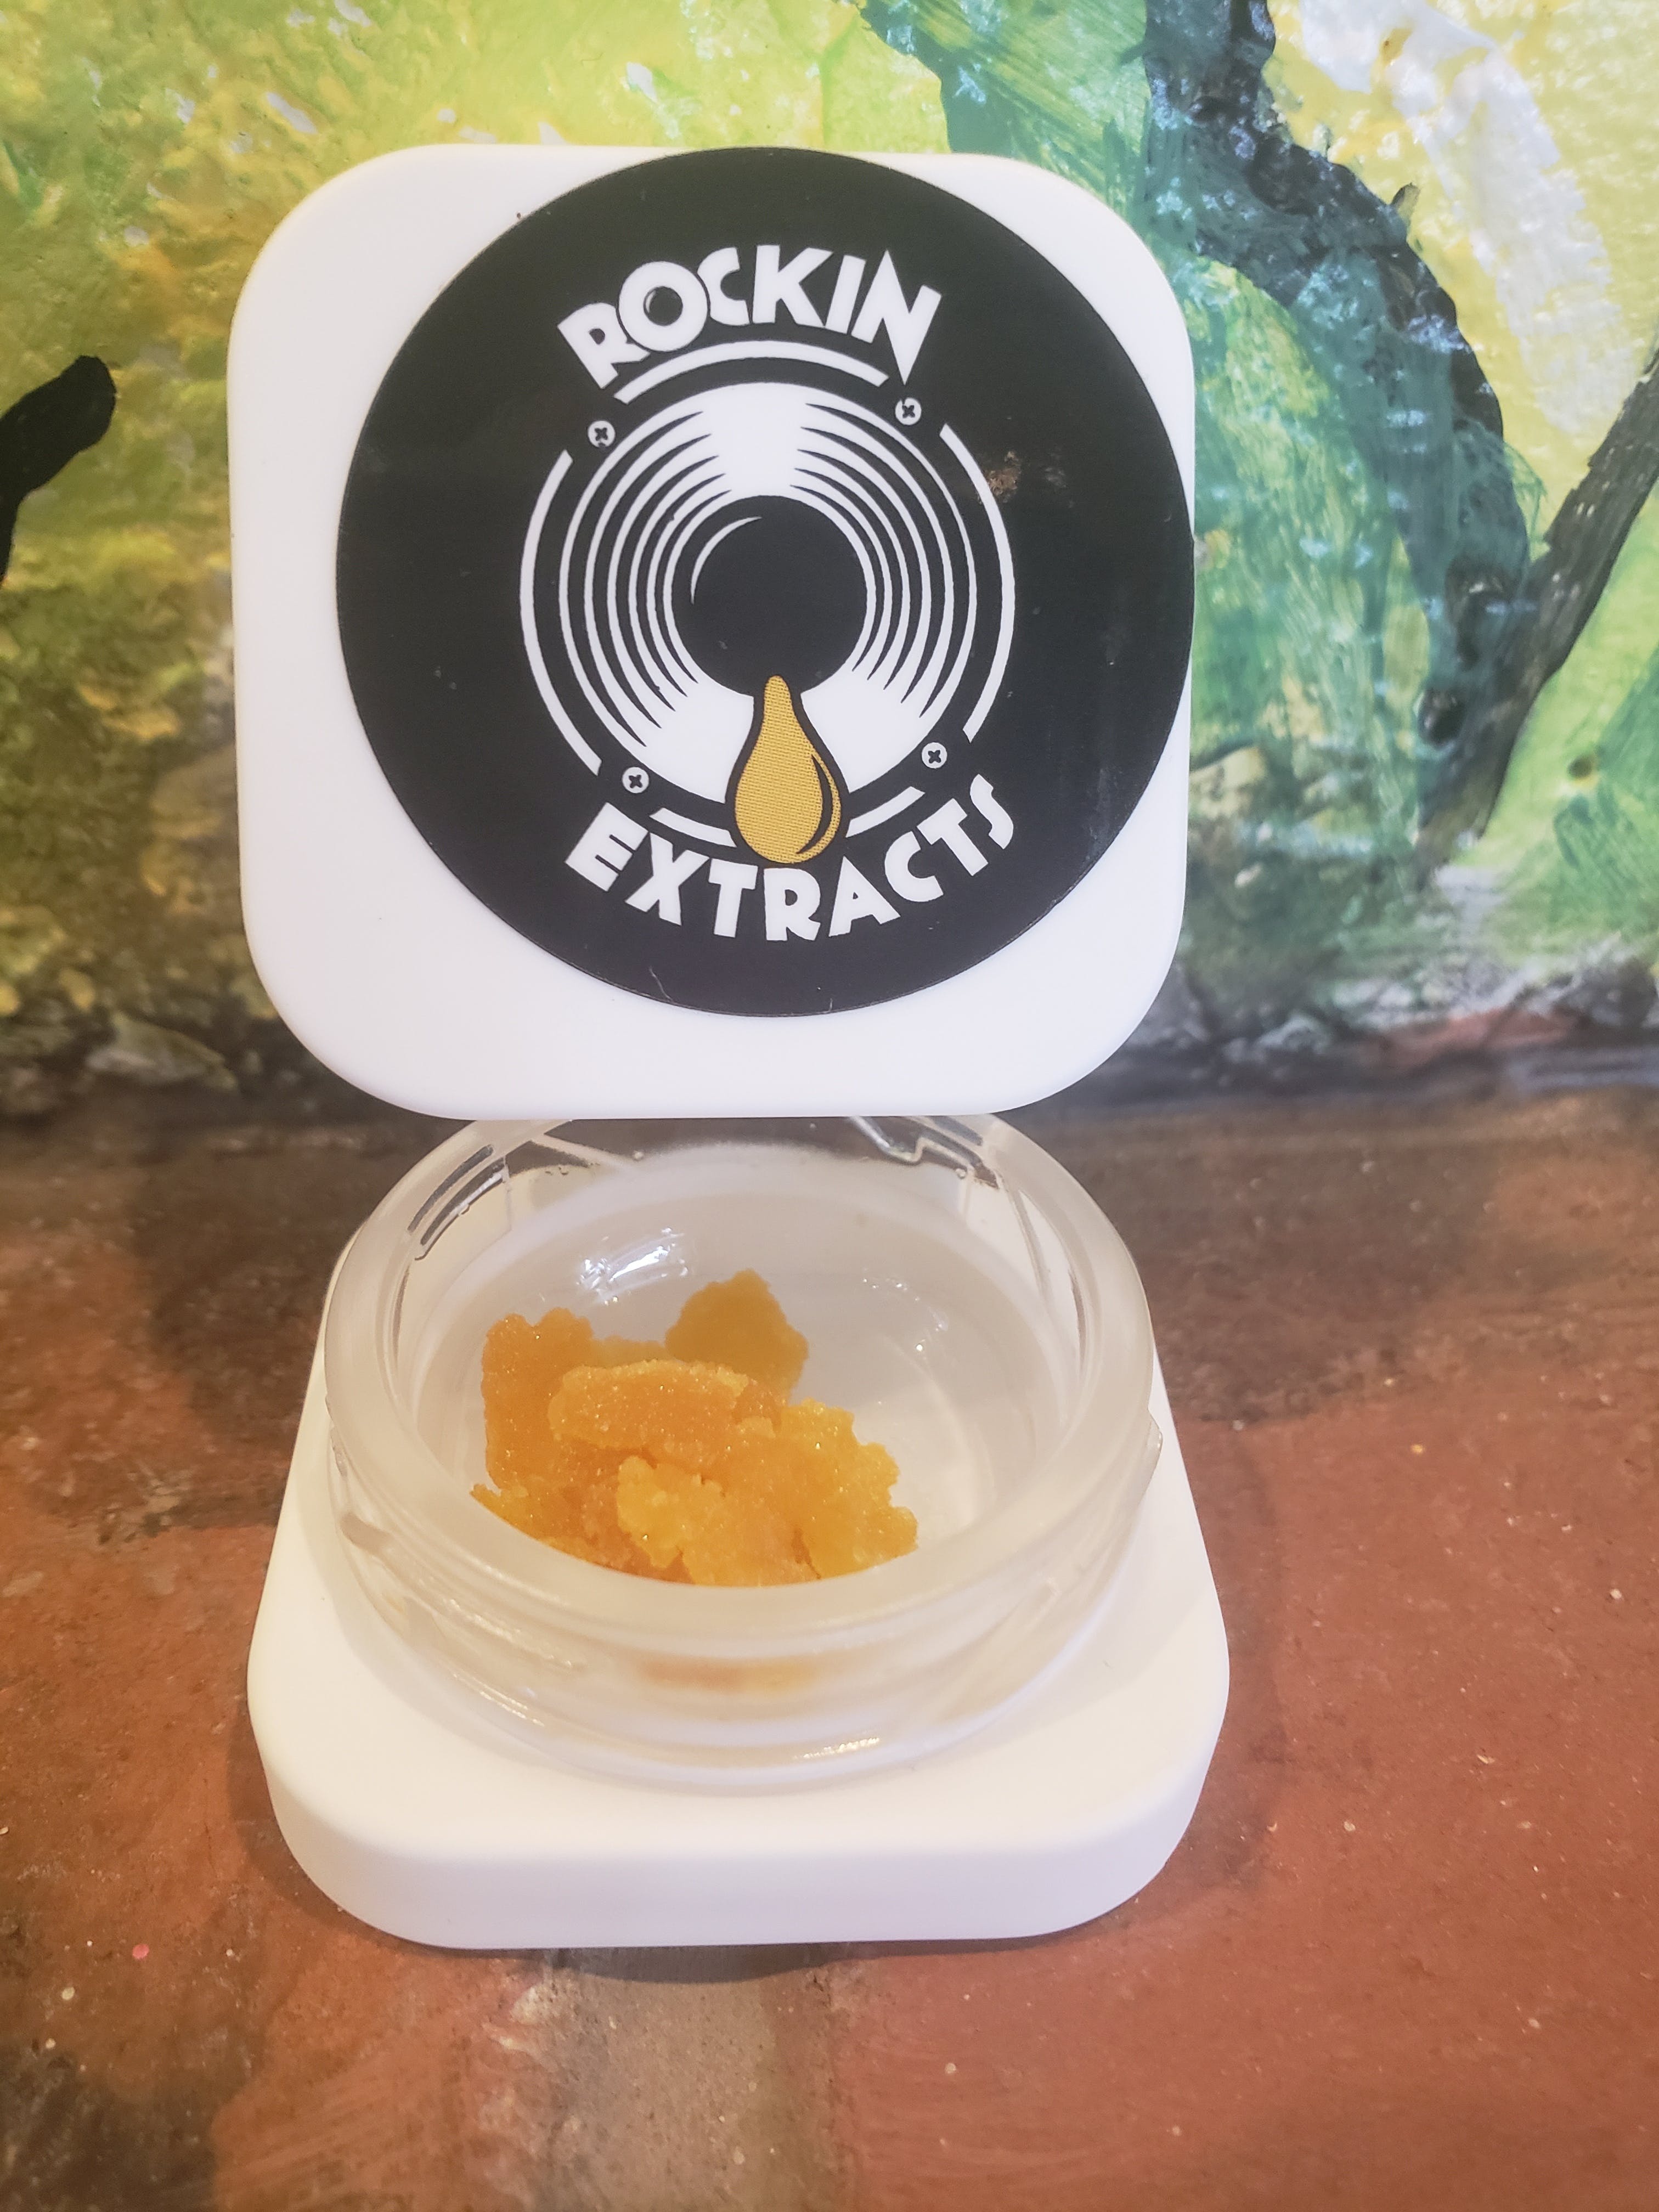 Rockin Extracts